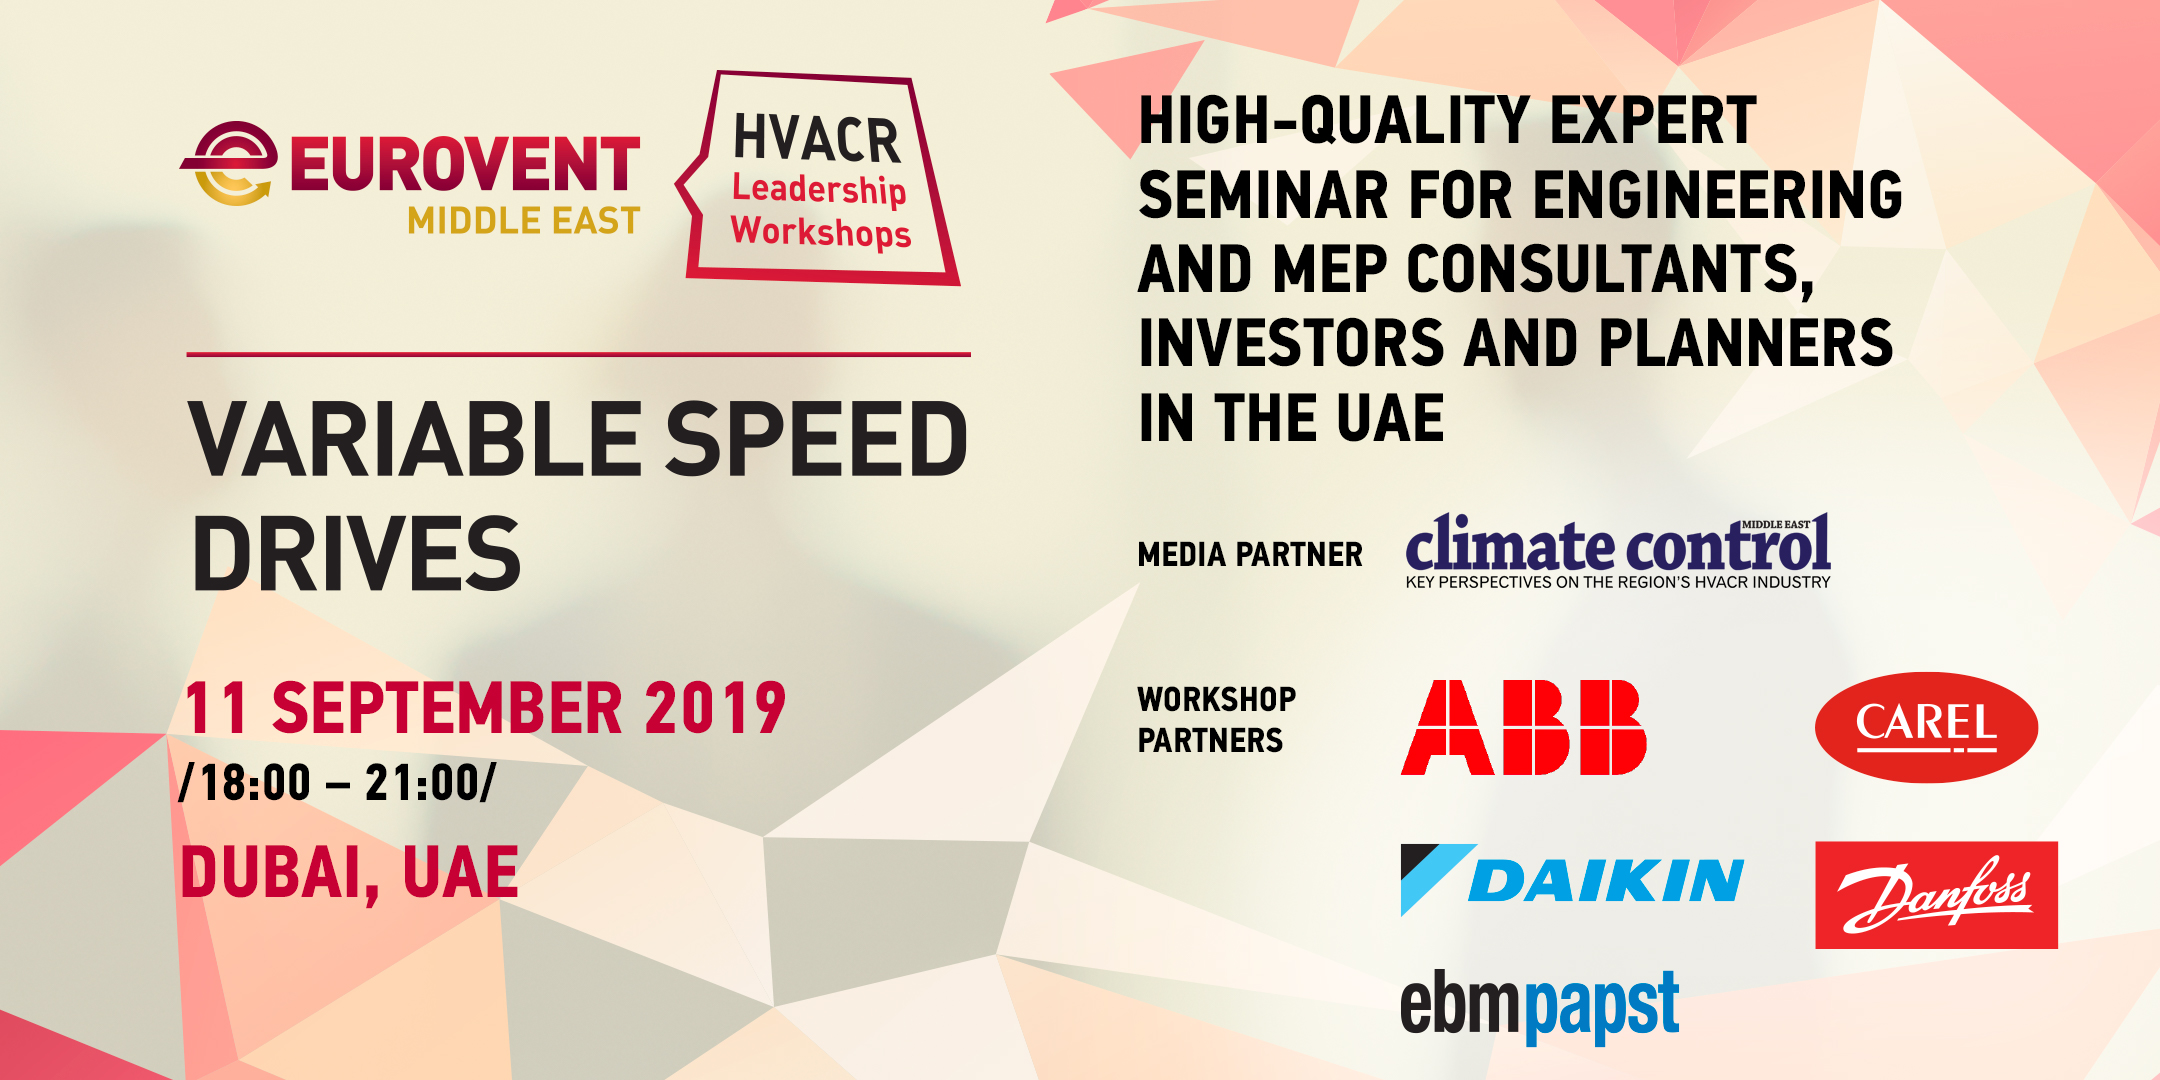 2019 - 'HVACR Leadership Workshops' by Eurovent Middle East - Variable Speed Drives: How to create sustainable building specifications